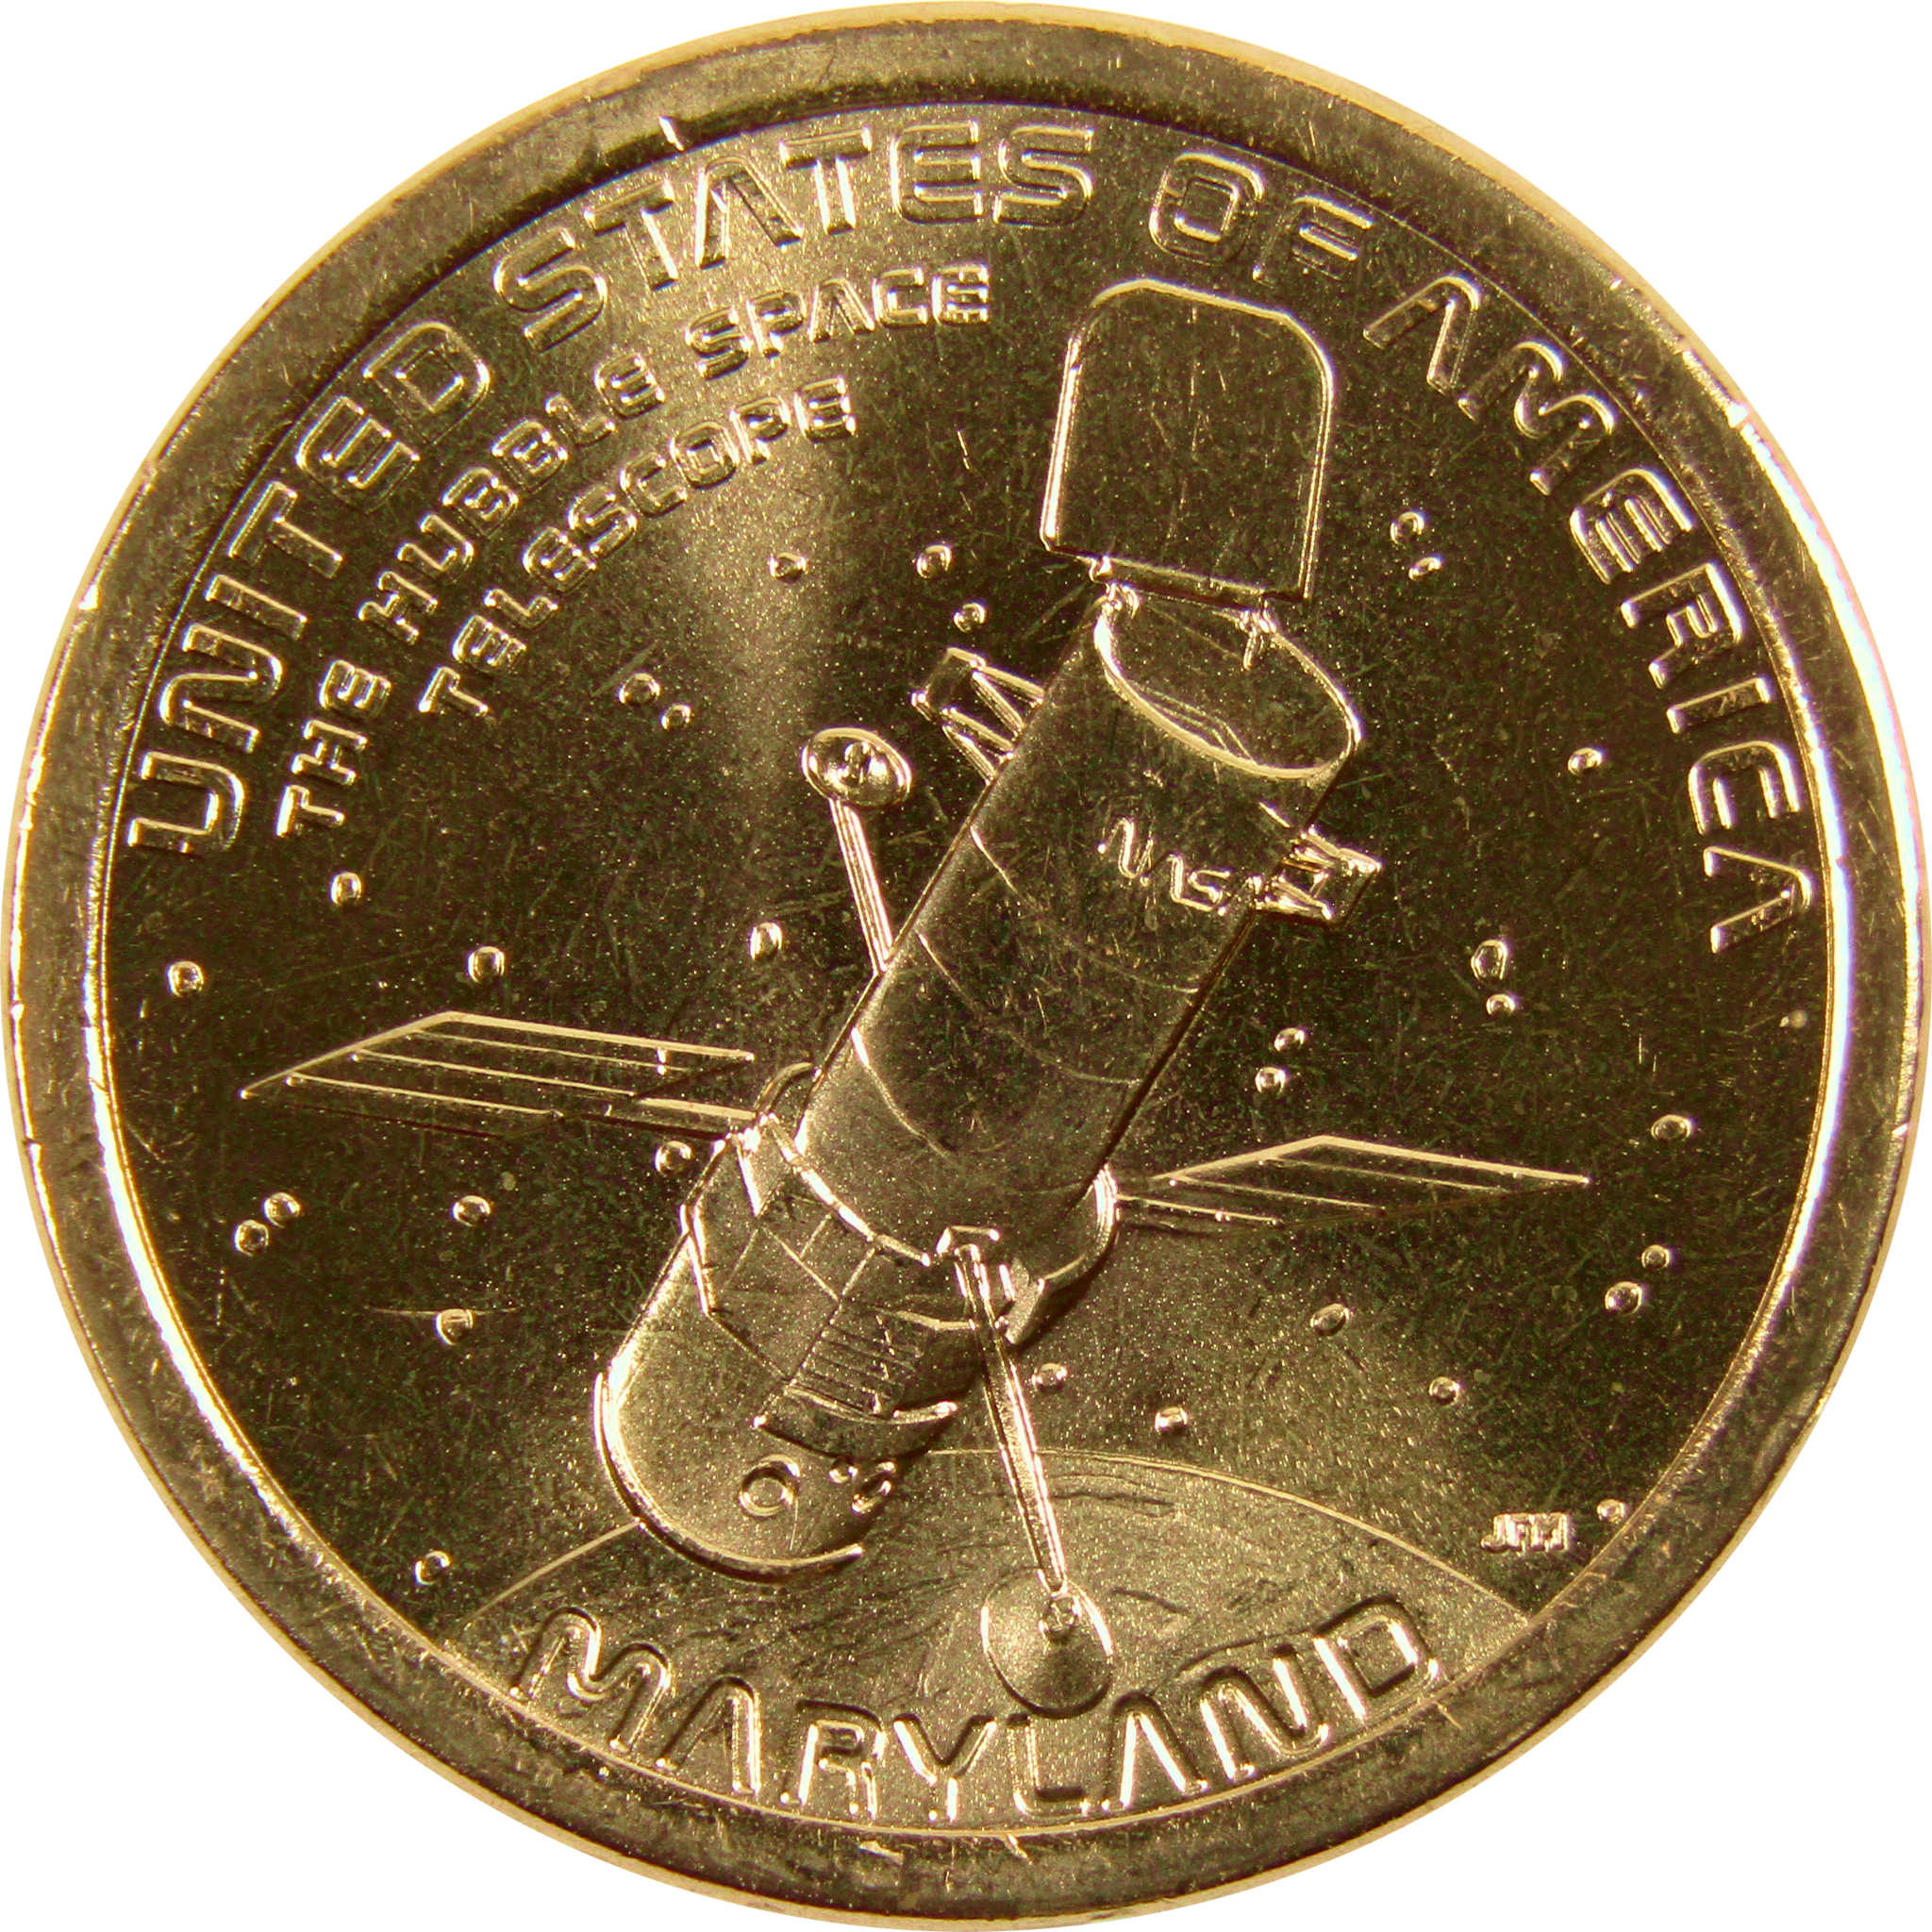 2020 P Hubble Space Telescope American Innovation Dollar Uncirculated